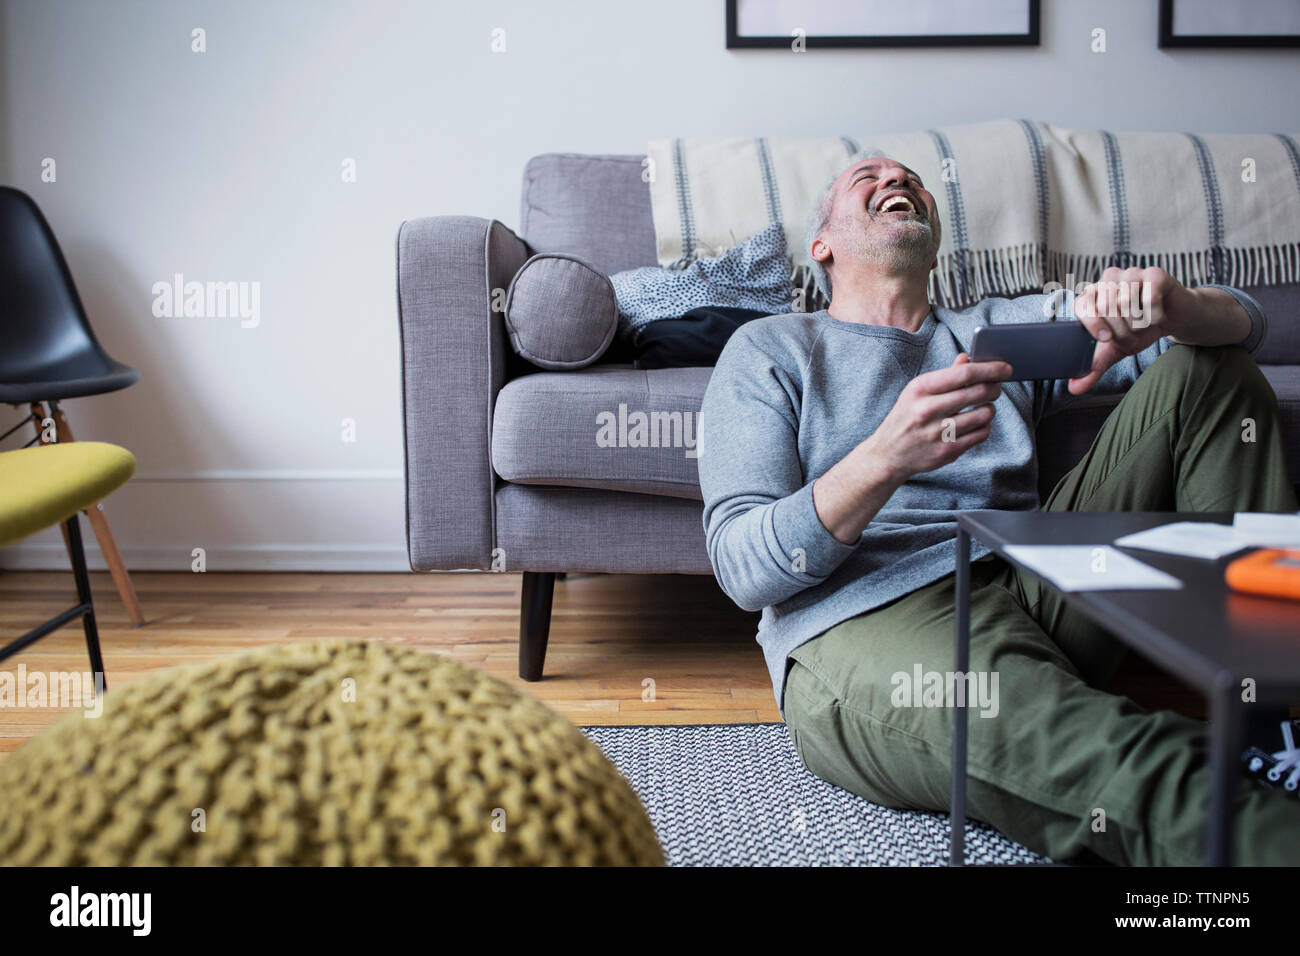 Cheerful mature man holding smart phone while sitting on floor in living room Stock Photo